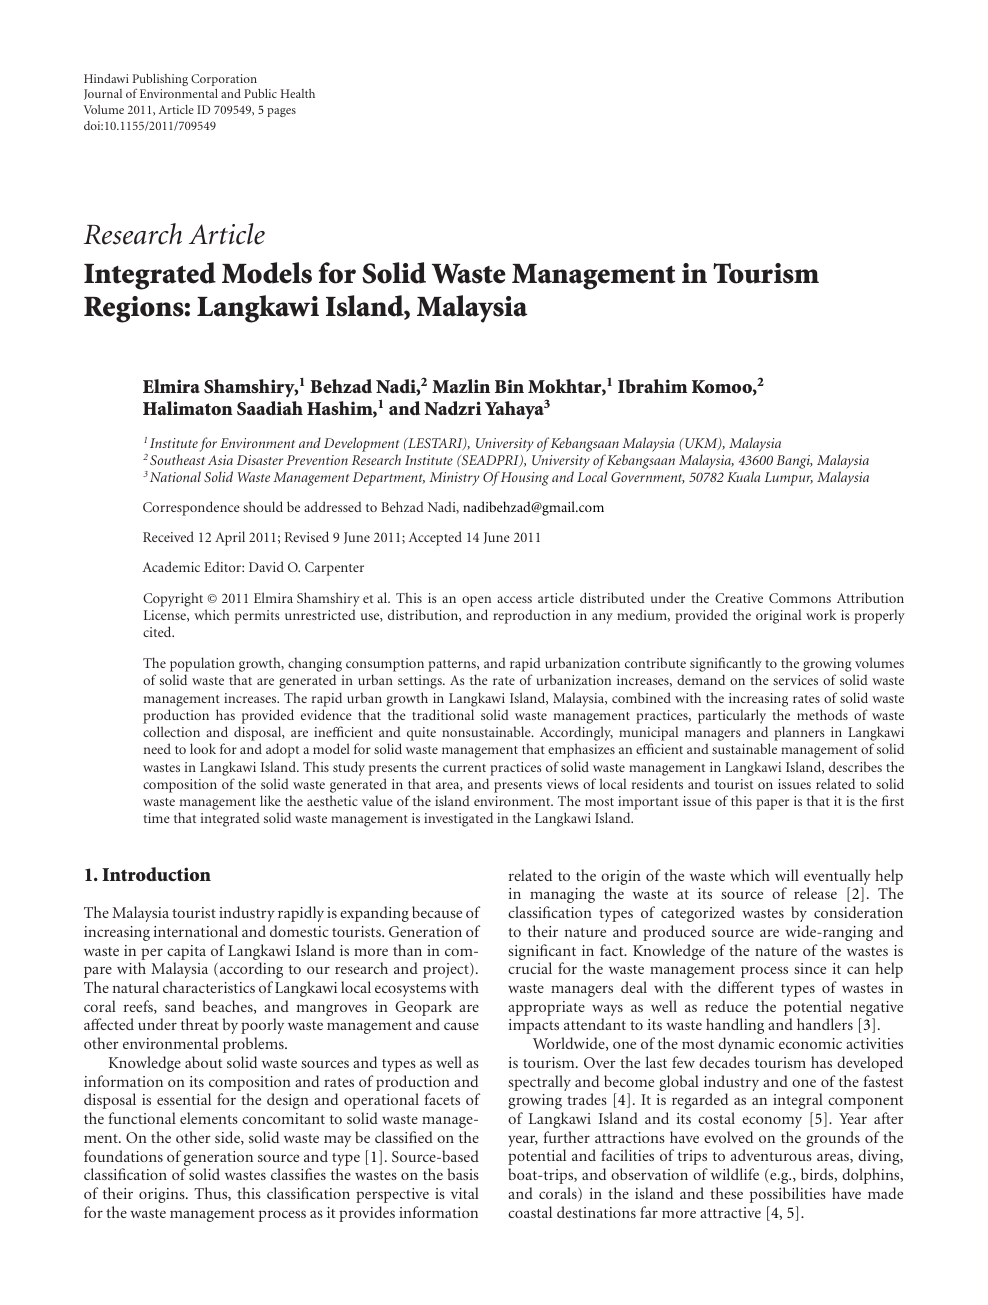 Integrated Models For Solid Waste Management In Tourism Regions Langkawi Island Malaysia Topic Of Research Paper In Earth And Related Environmental Sciences Download Scholarly Article Pdf And Read For Free On